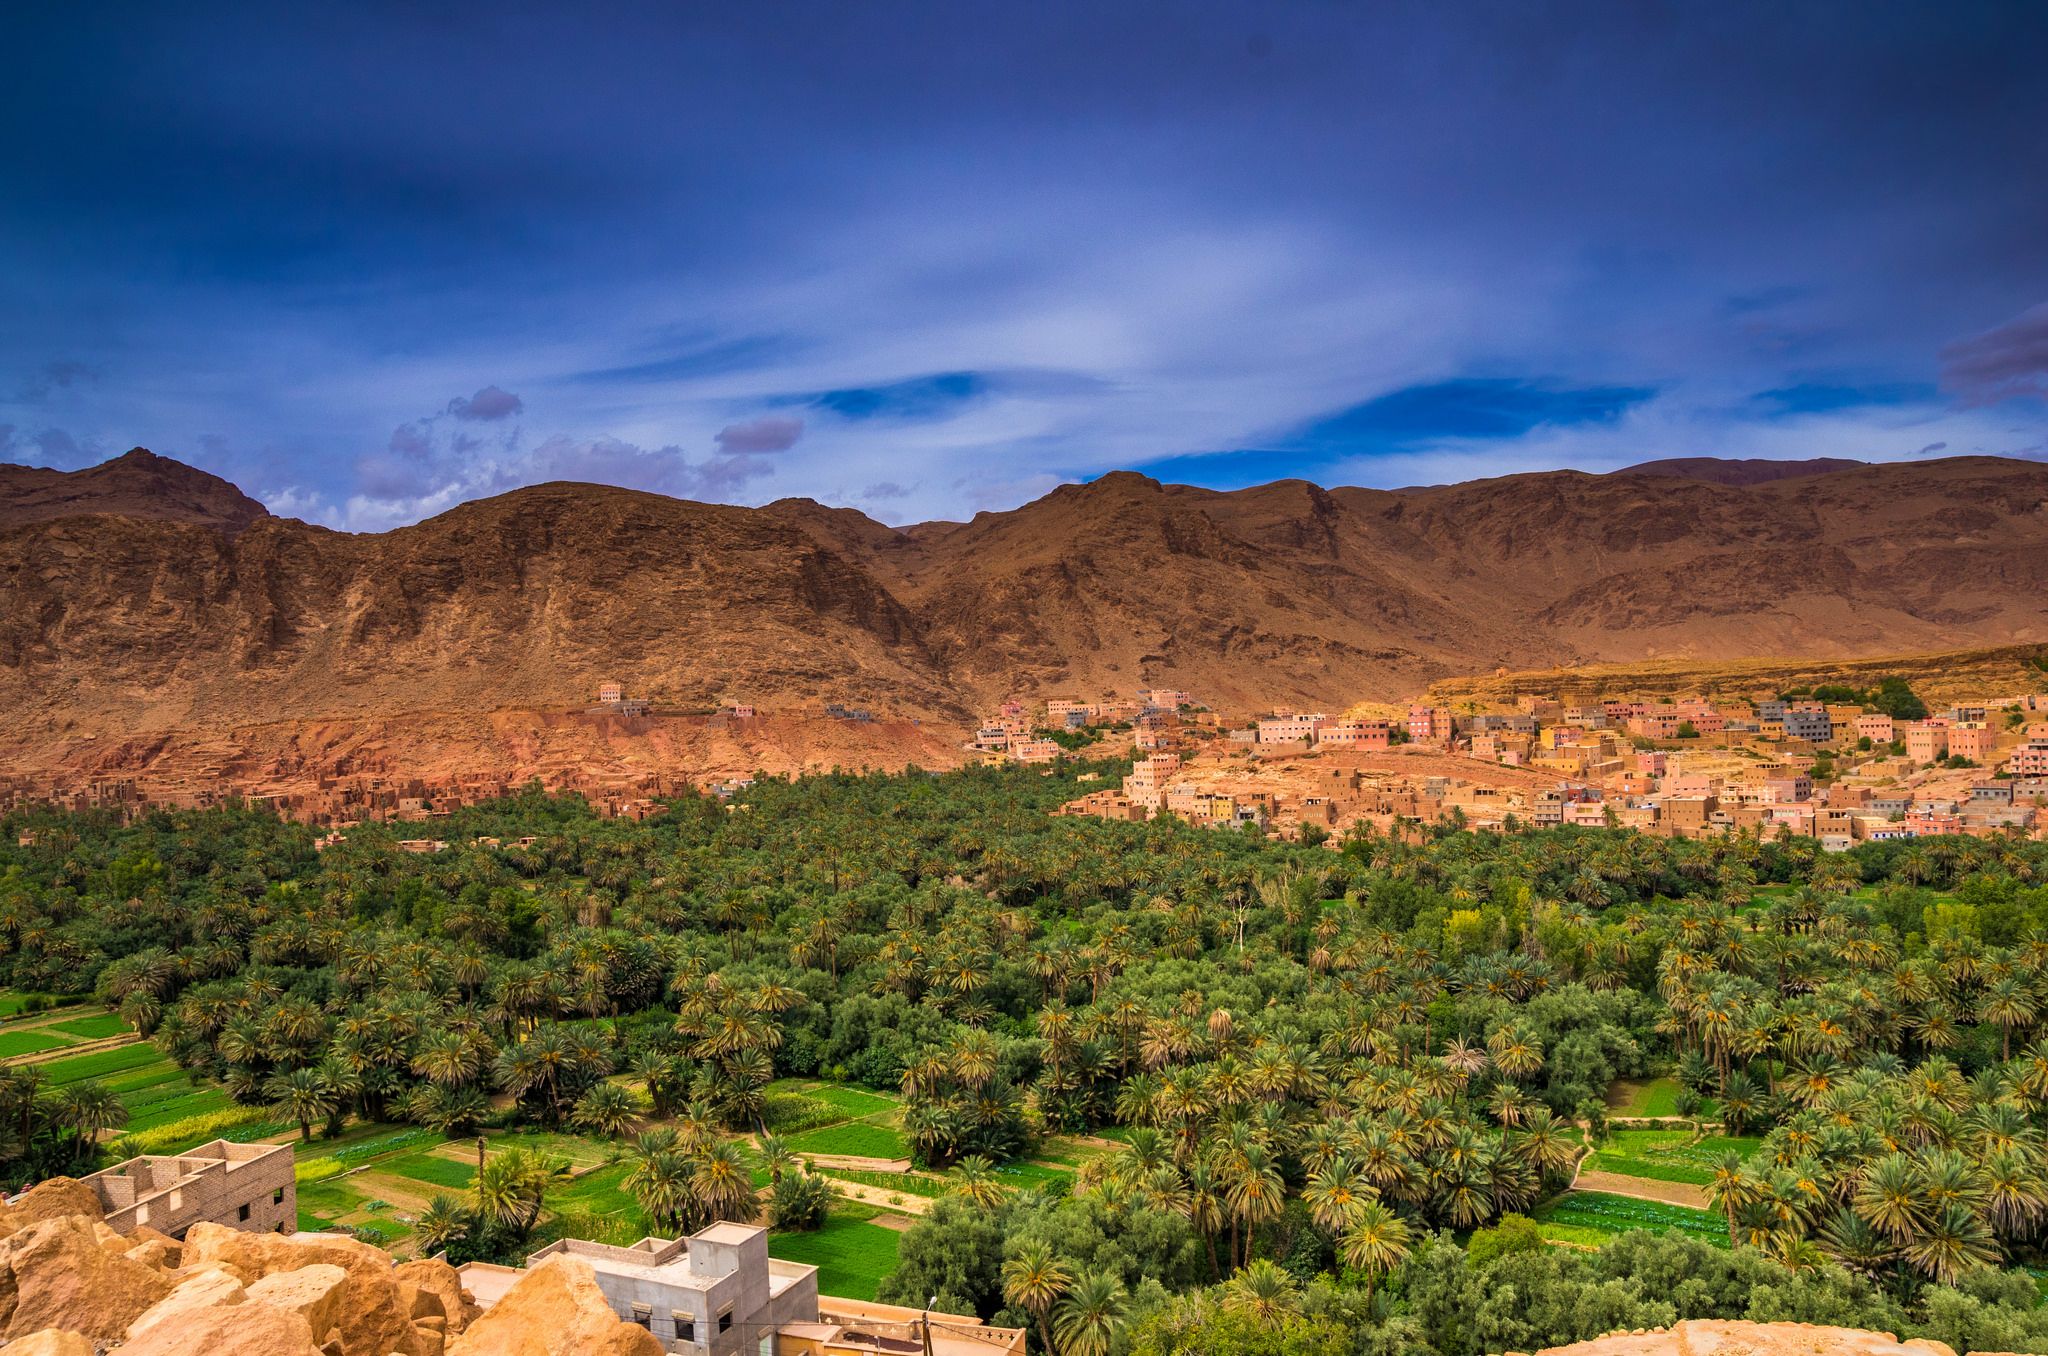 Fint Oasis, Morocco: Travel Guide